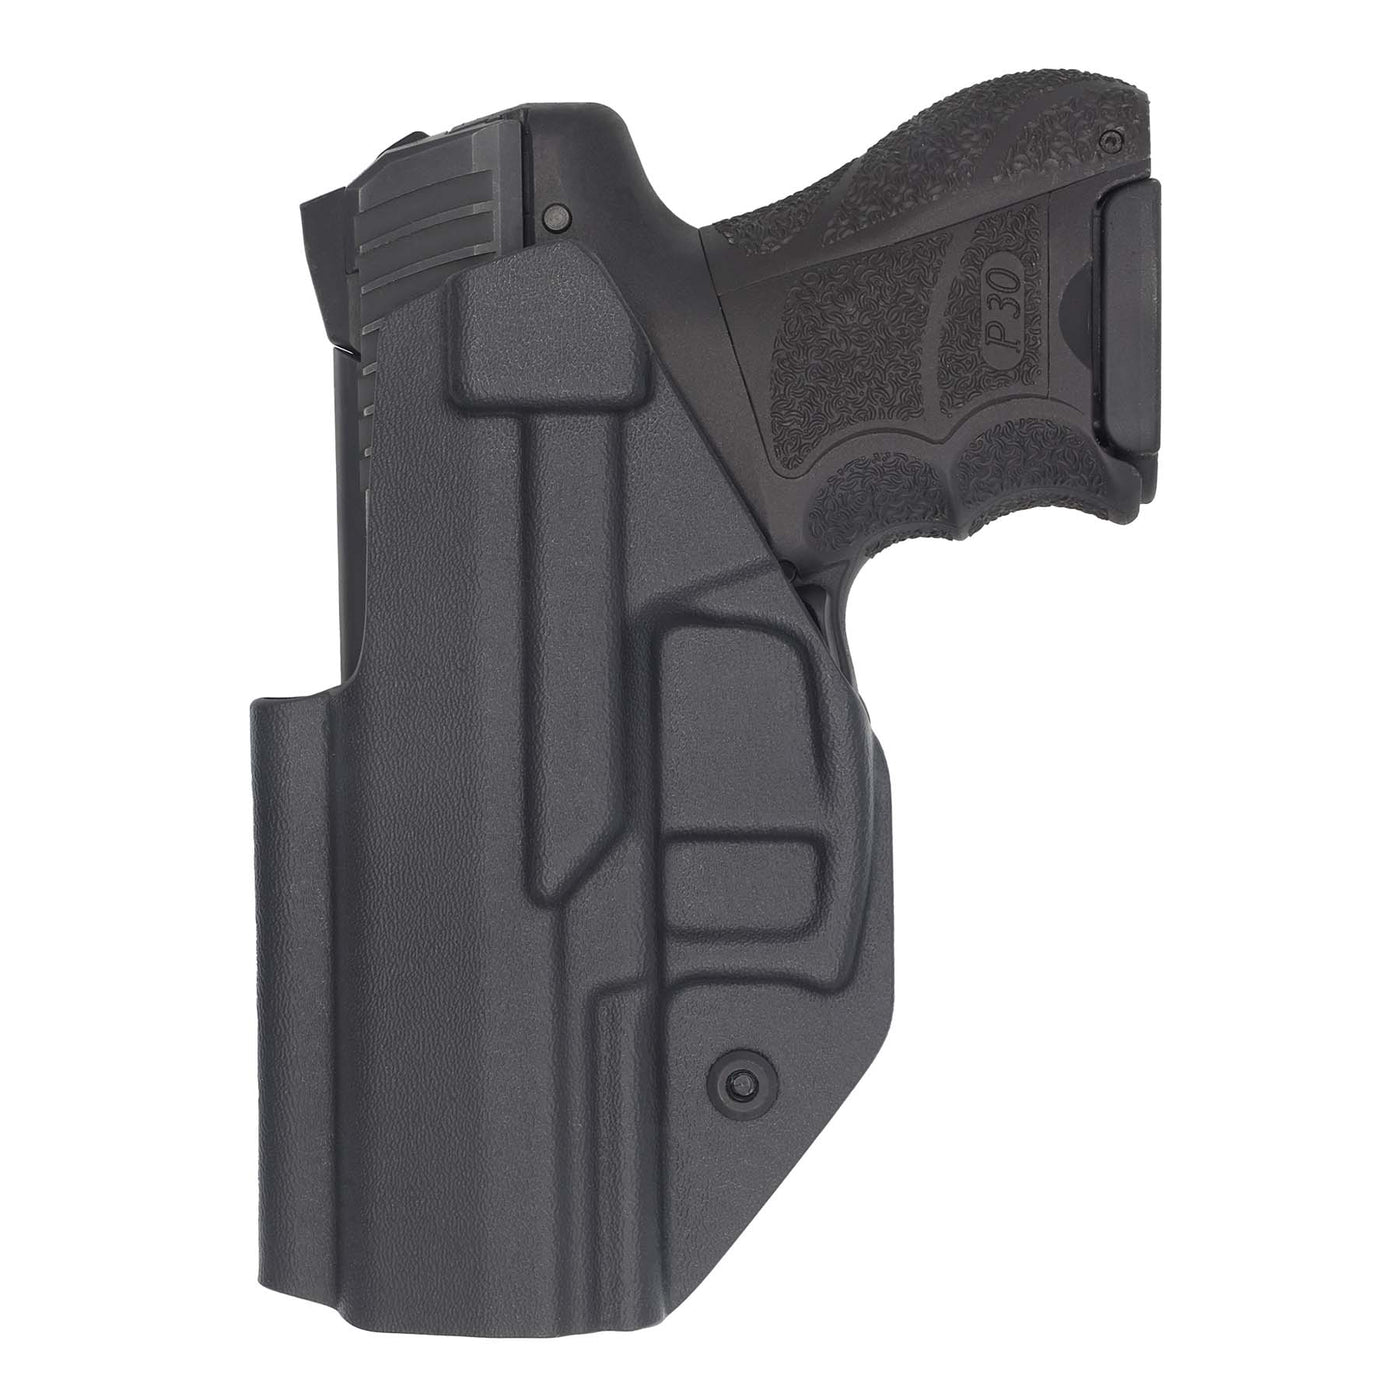 C&G Holsters IWB inside the waistband Holster for the h&k p30sk rear view